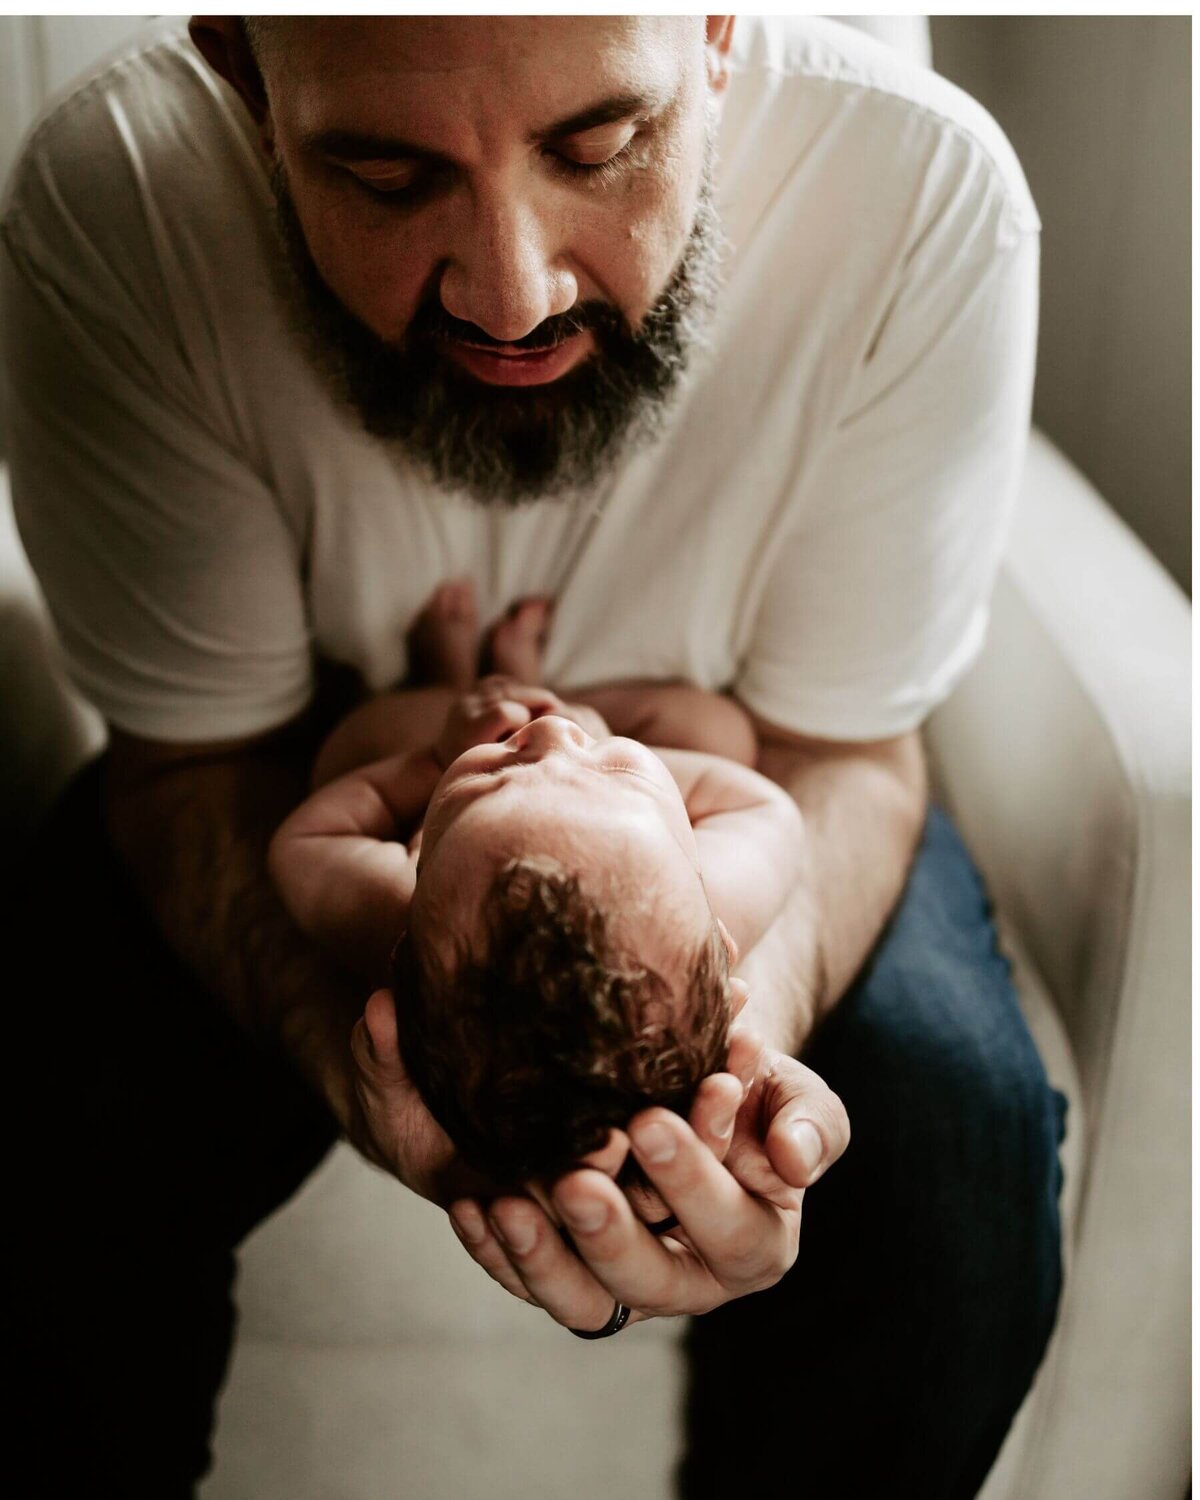 A bearded man cradling a baby in his arms poses for the Pittsburgh newborn photographer.